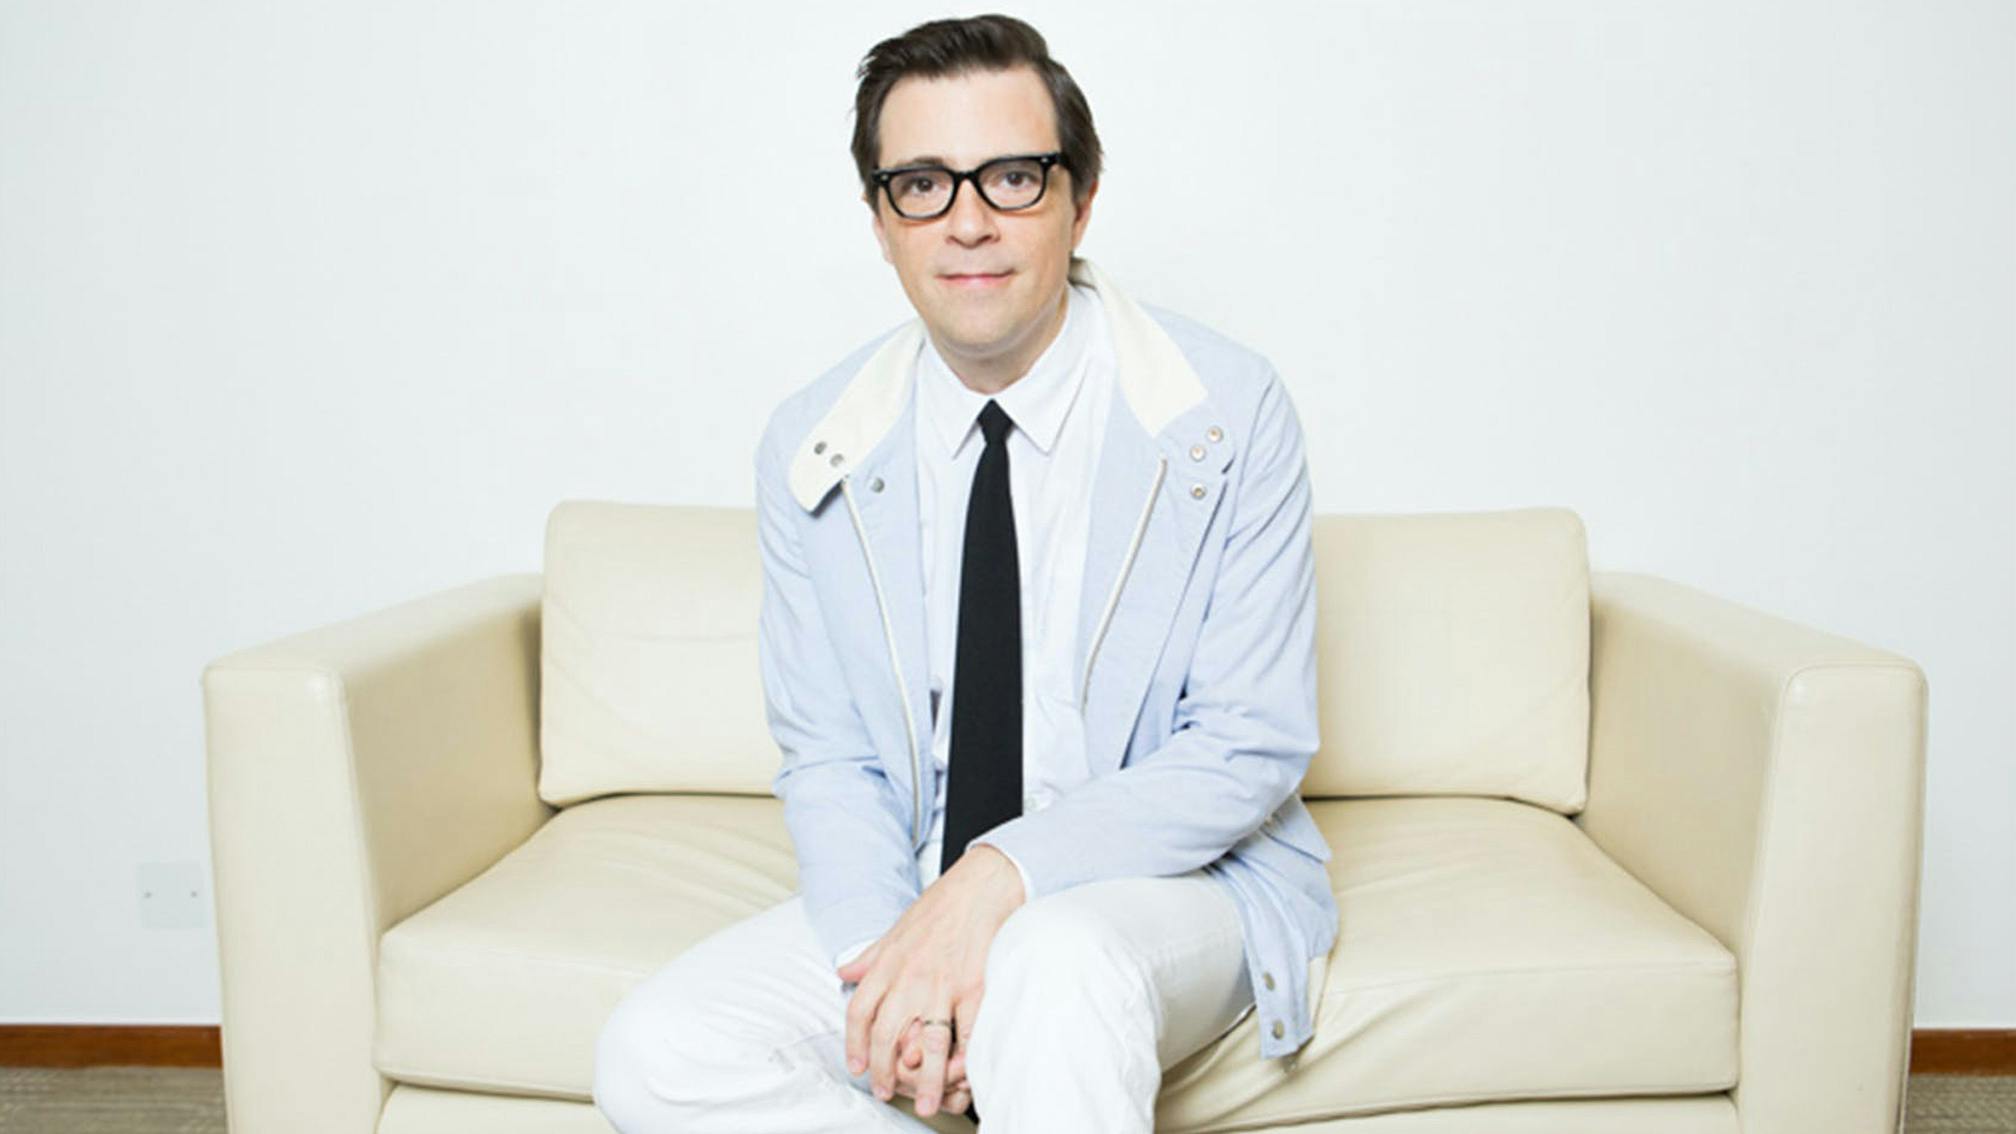 Weezer's Rivers Cuomo: “All I Need To Do Is Be Myself And People Think It’s Weird And Entertaining”